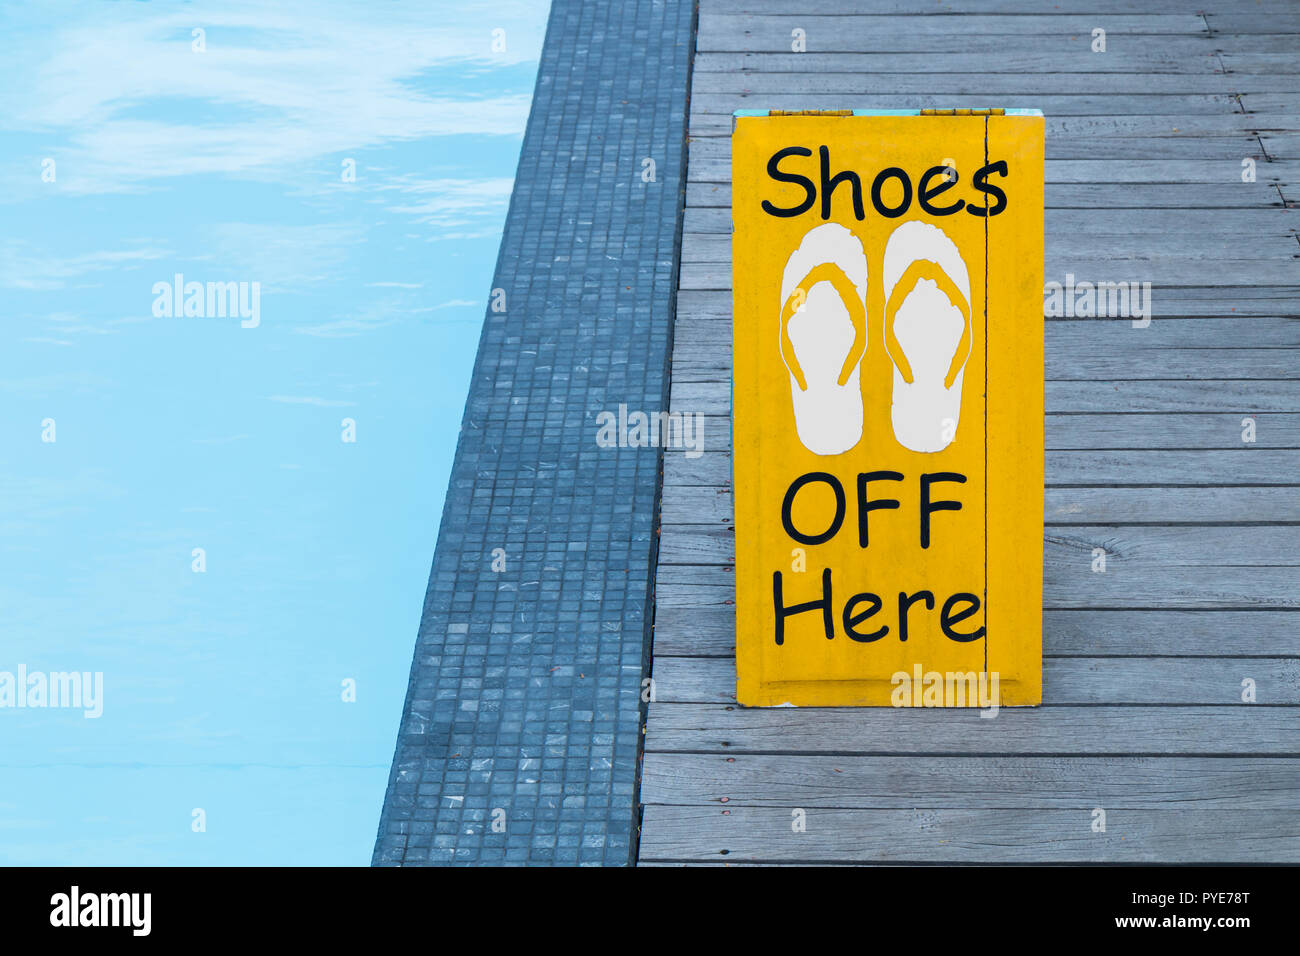 No shoes sign by the swimming pool on the wooden floor in yellow color Stock Photo